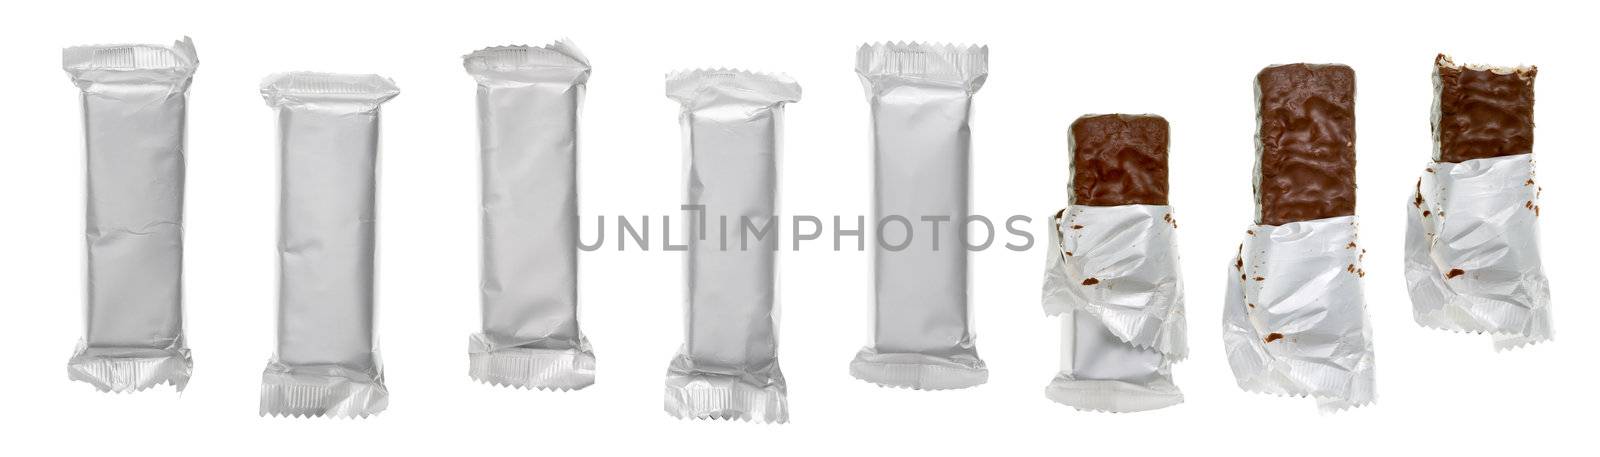 Set of chocolate or cereal bars on white background